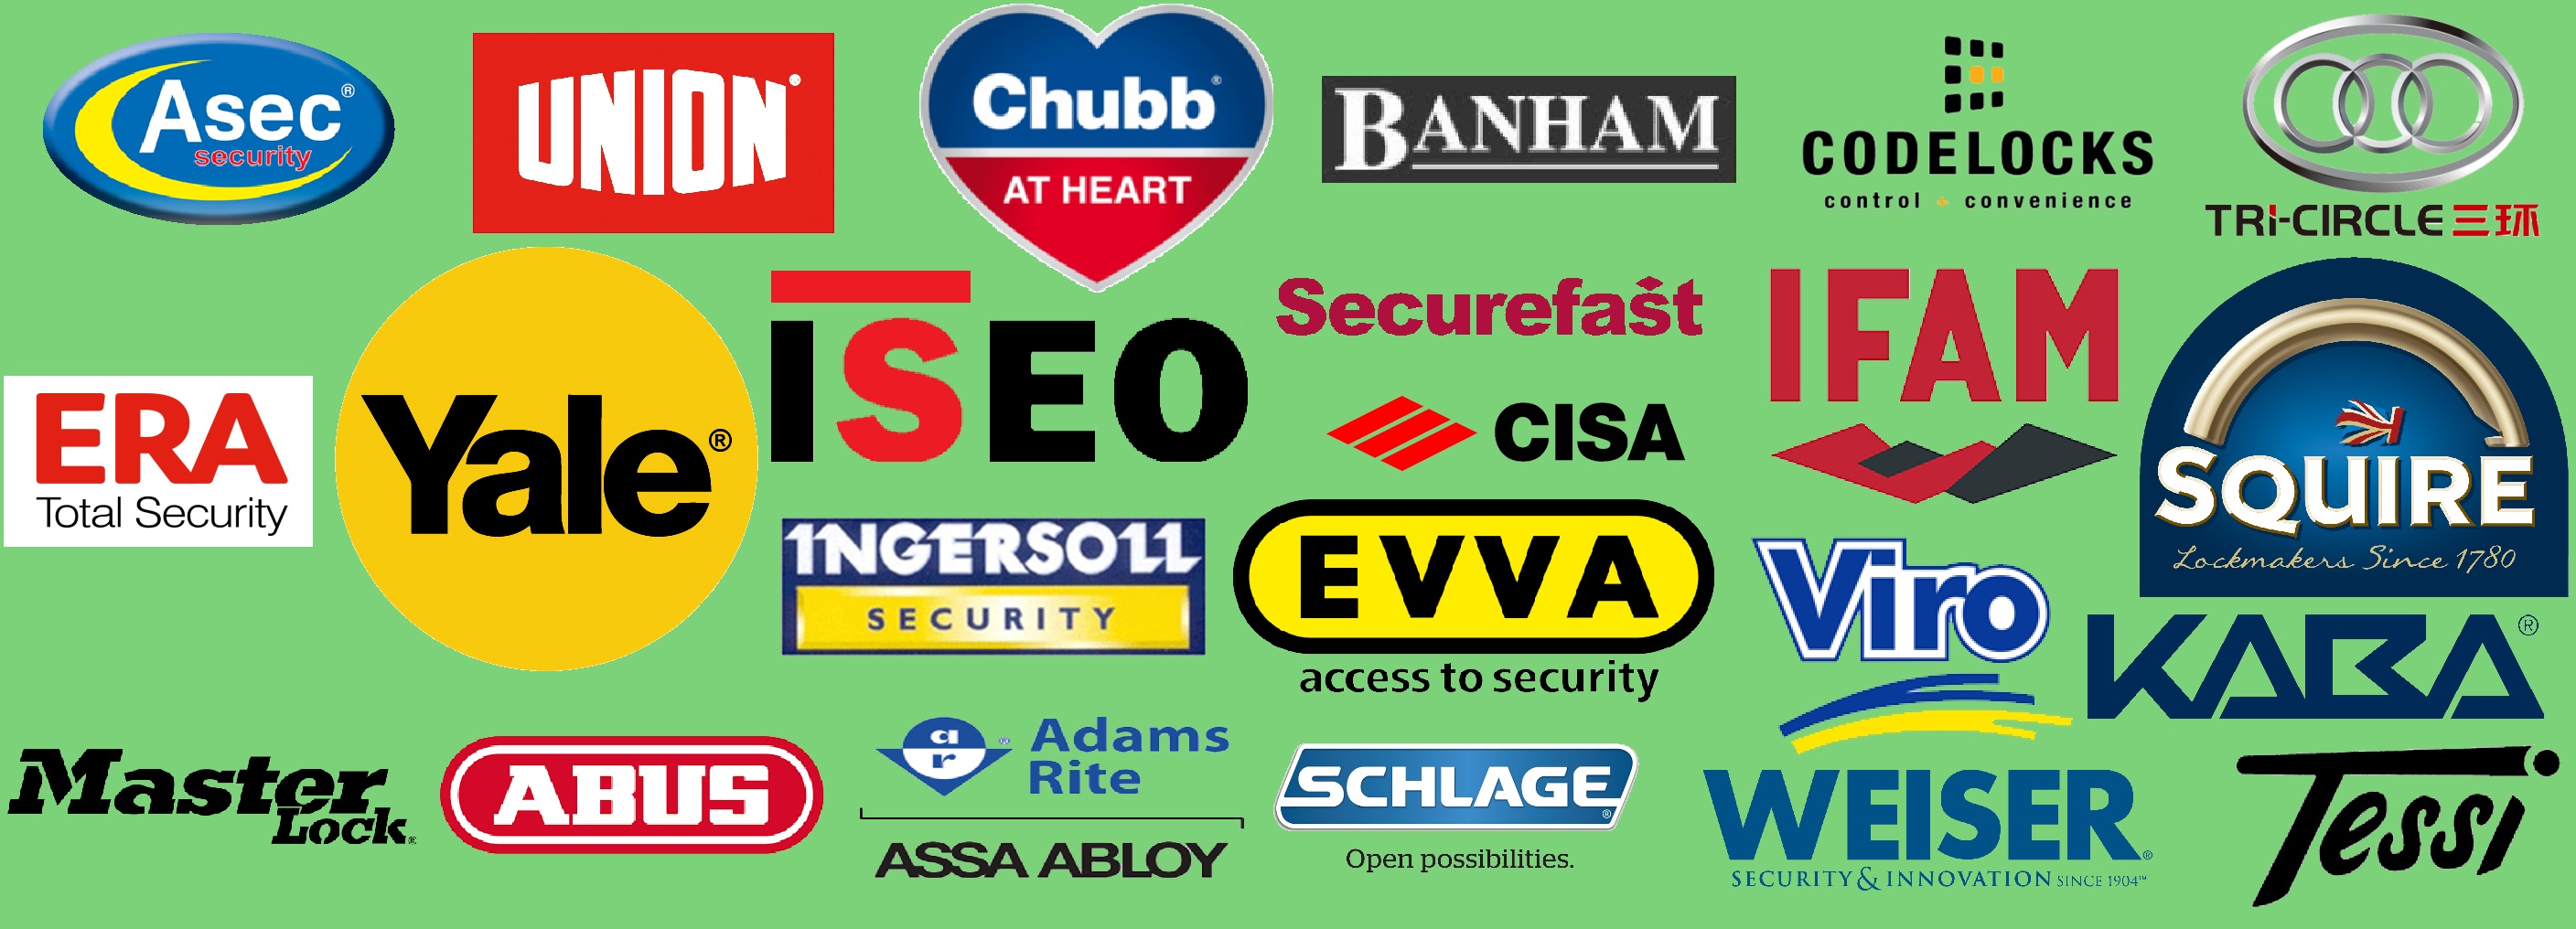 WE ARE AGENTS FOR MANY LEADING BRANDS OF LOCKS